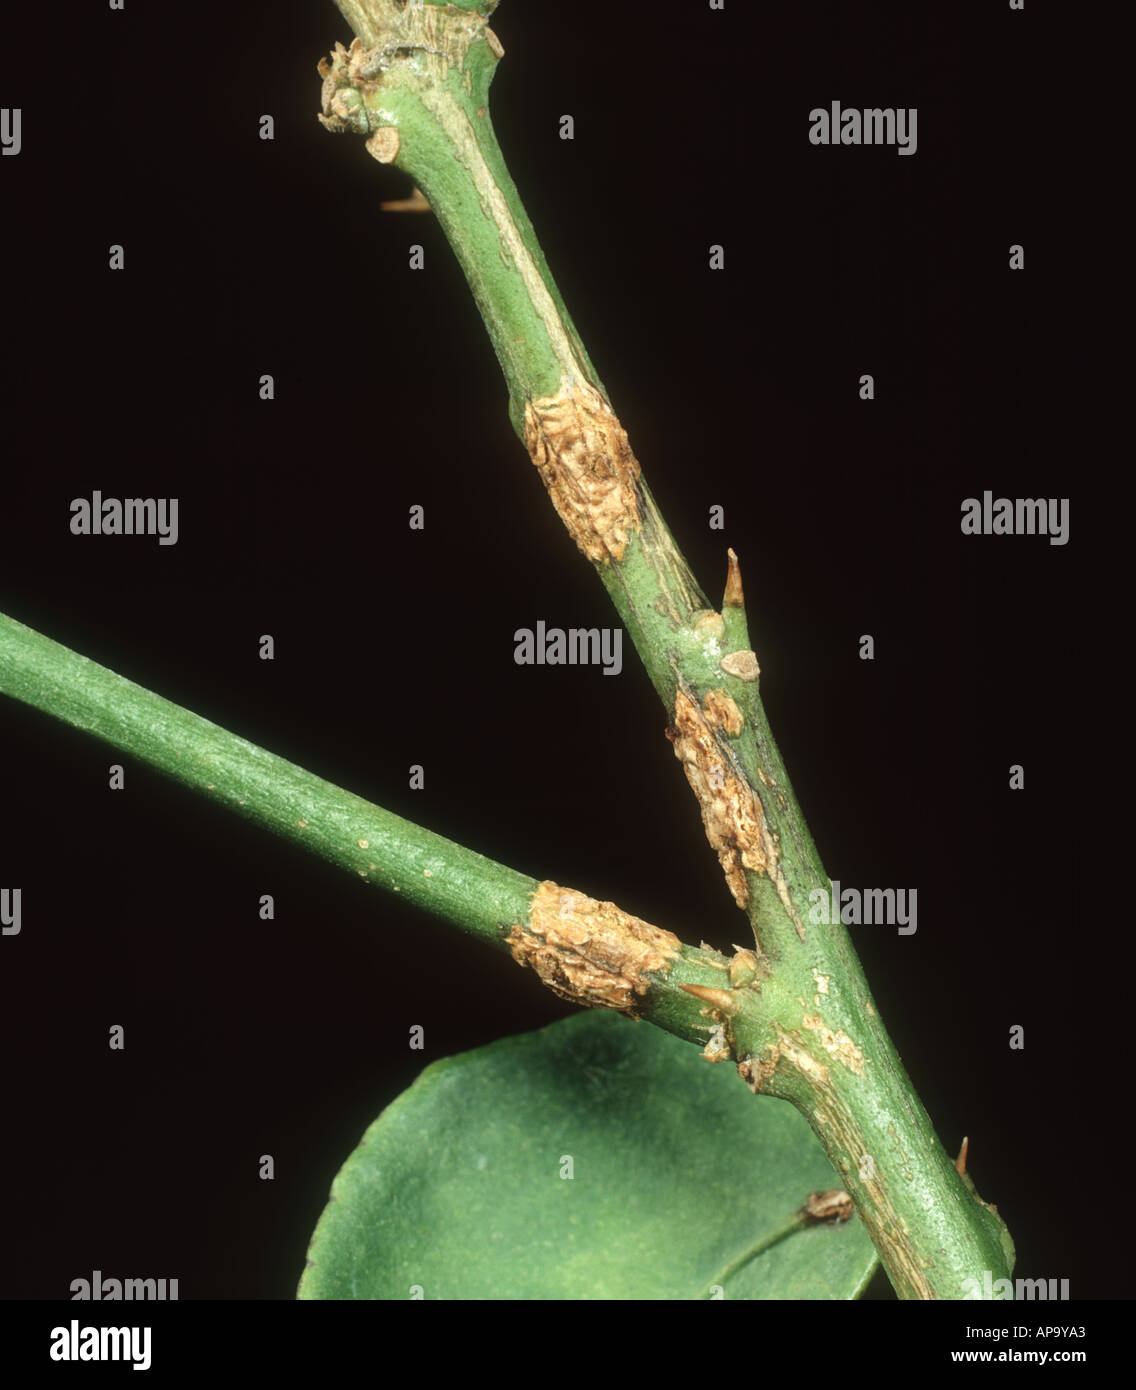 Bacterial canker Xanthomonas citri lesions on young lemon tree wood Stock Photo